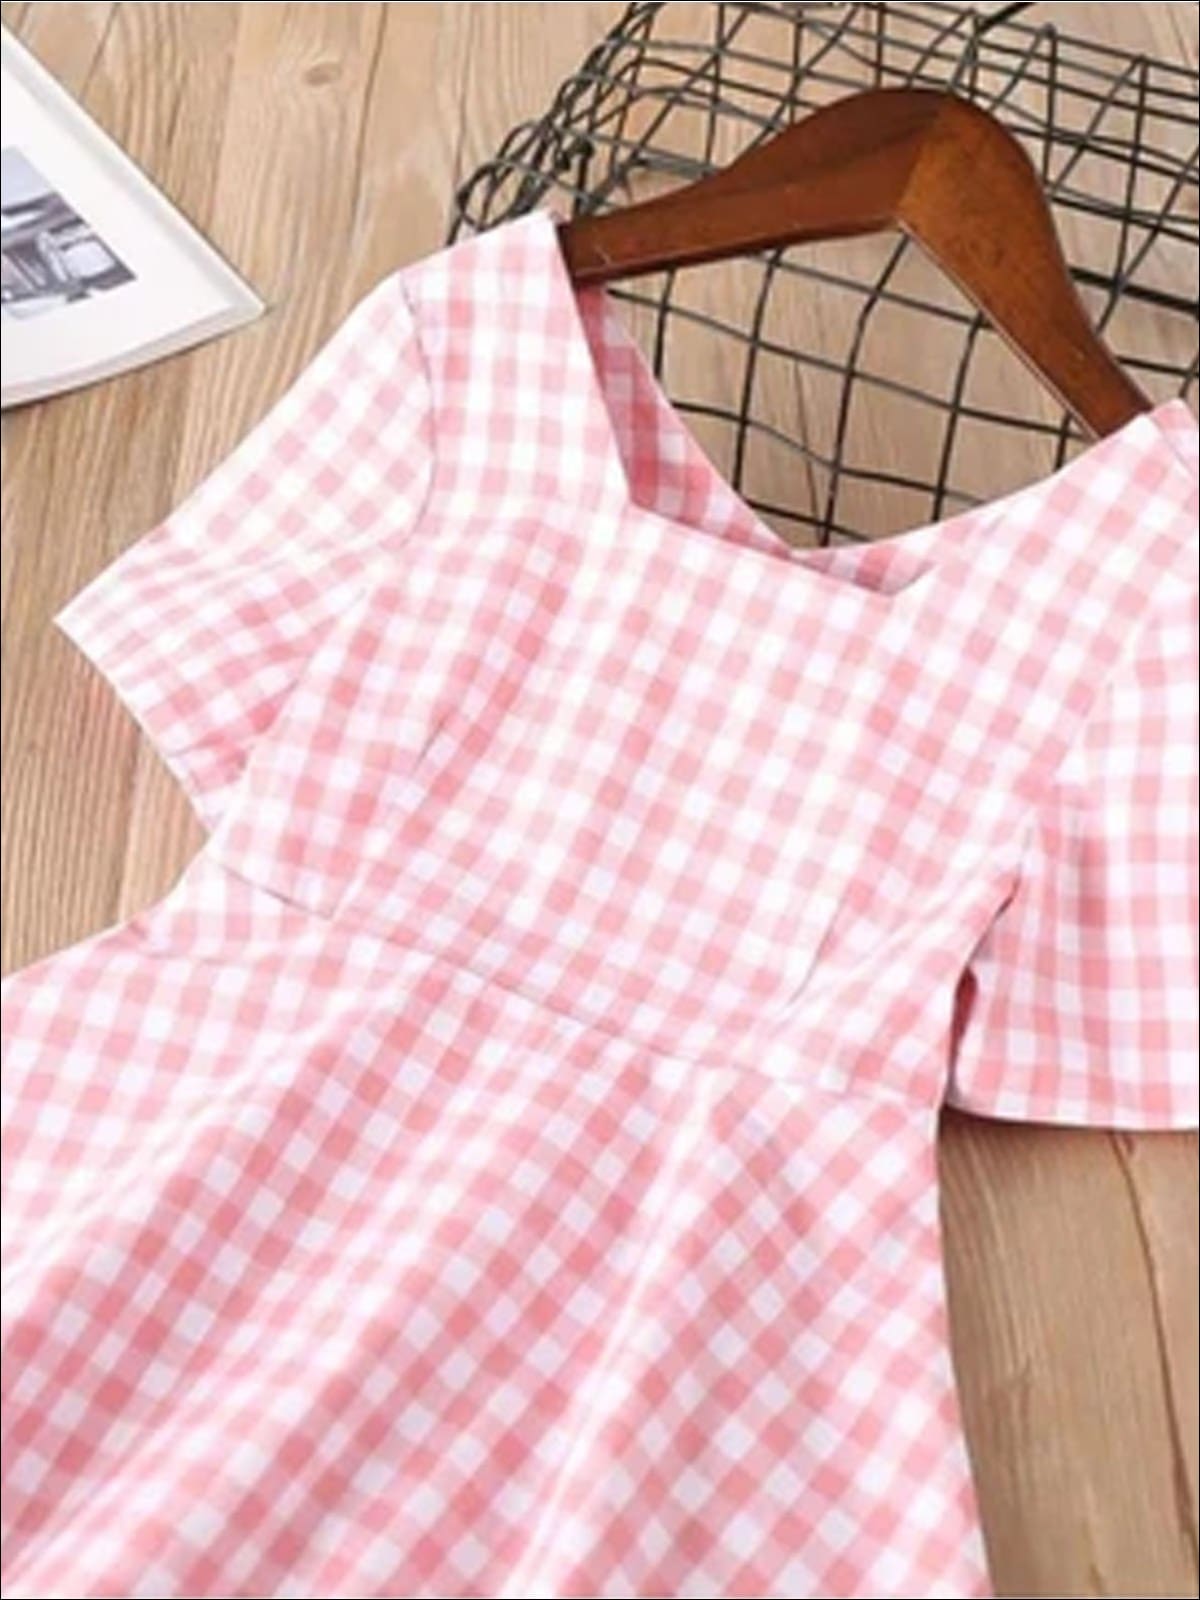 Girls Blue and White Gingham Print Bow Back Dress - Girls Spring Casual Dress